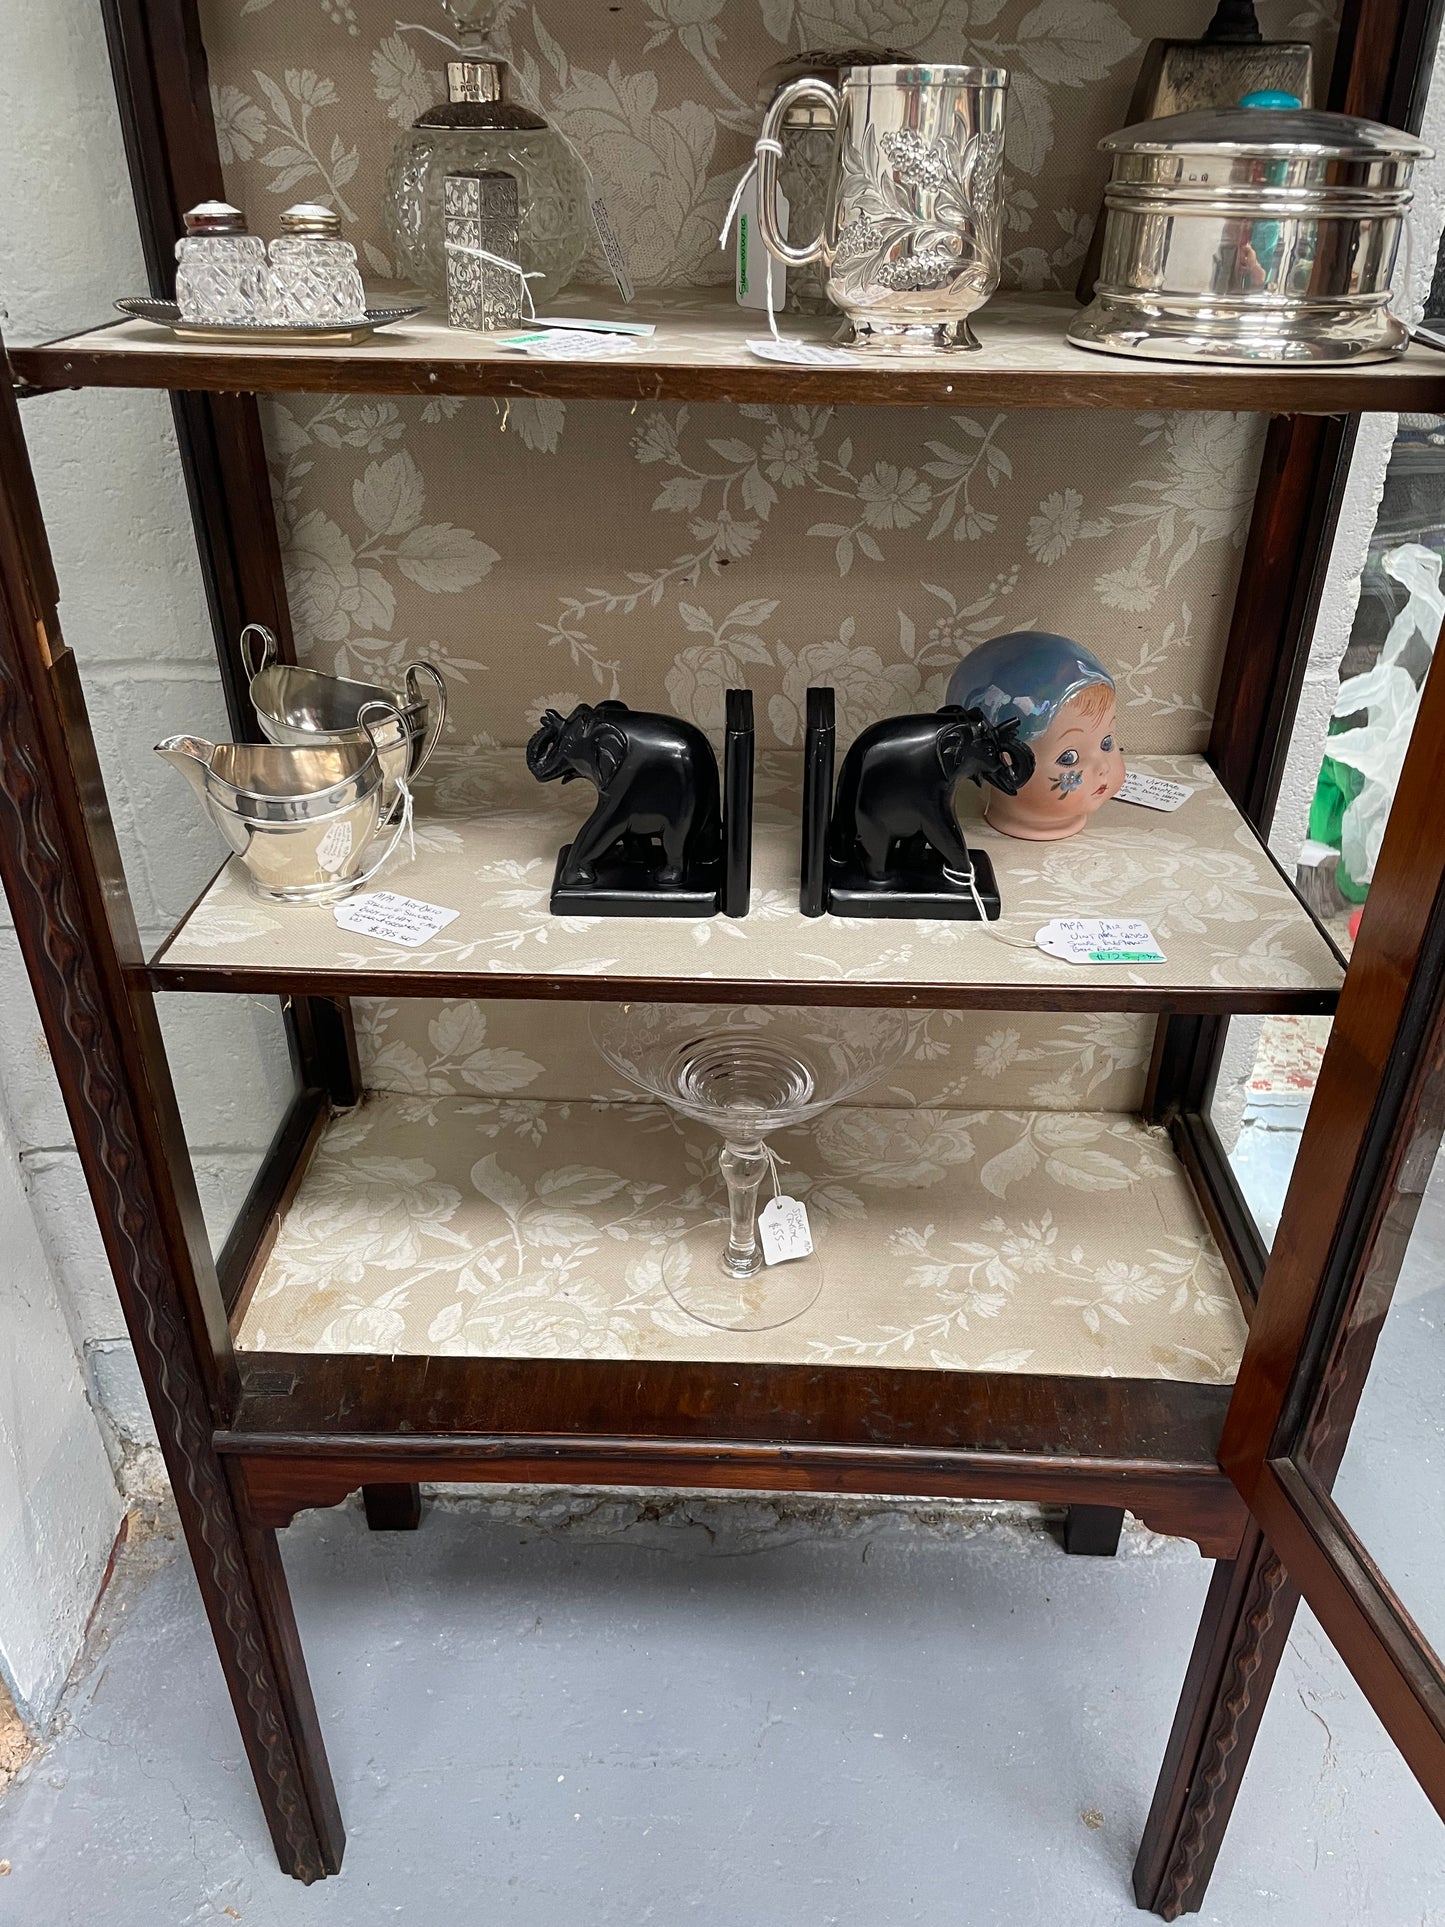 Lovely  Display Cabinet of small proportions